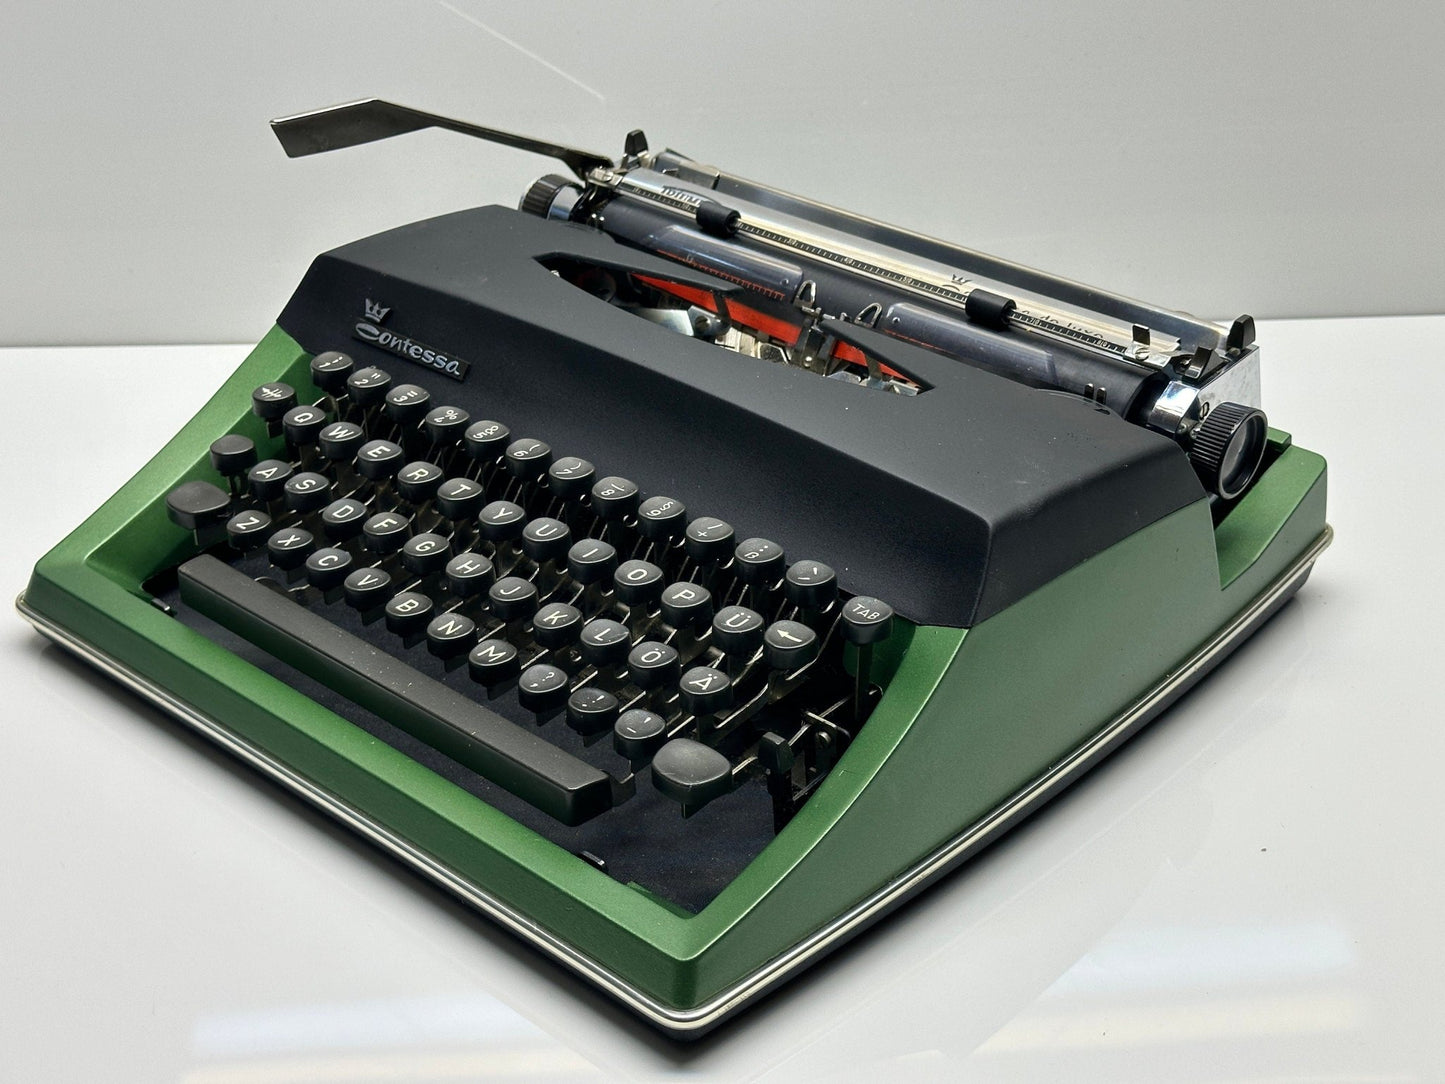 Adler Contessa Deluxe Typewriter - Black Cover and Green Body, QWERTY Option, Refurbished with Black Bag